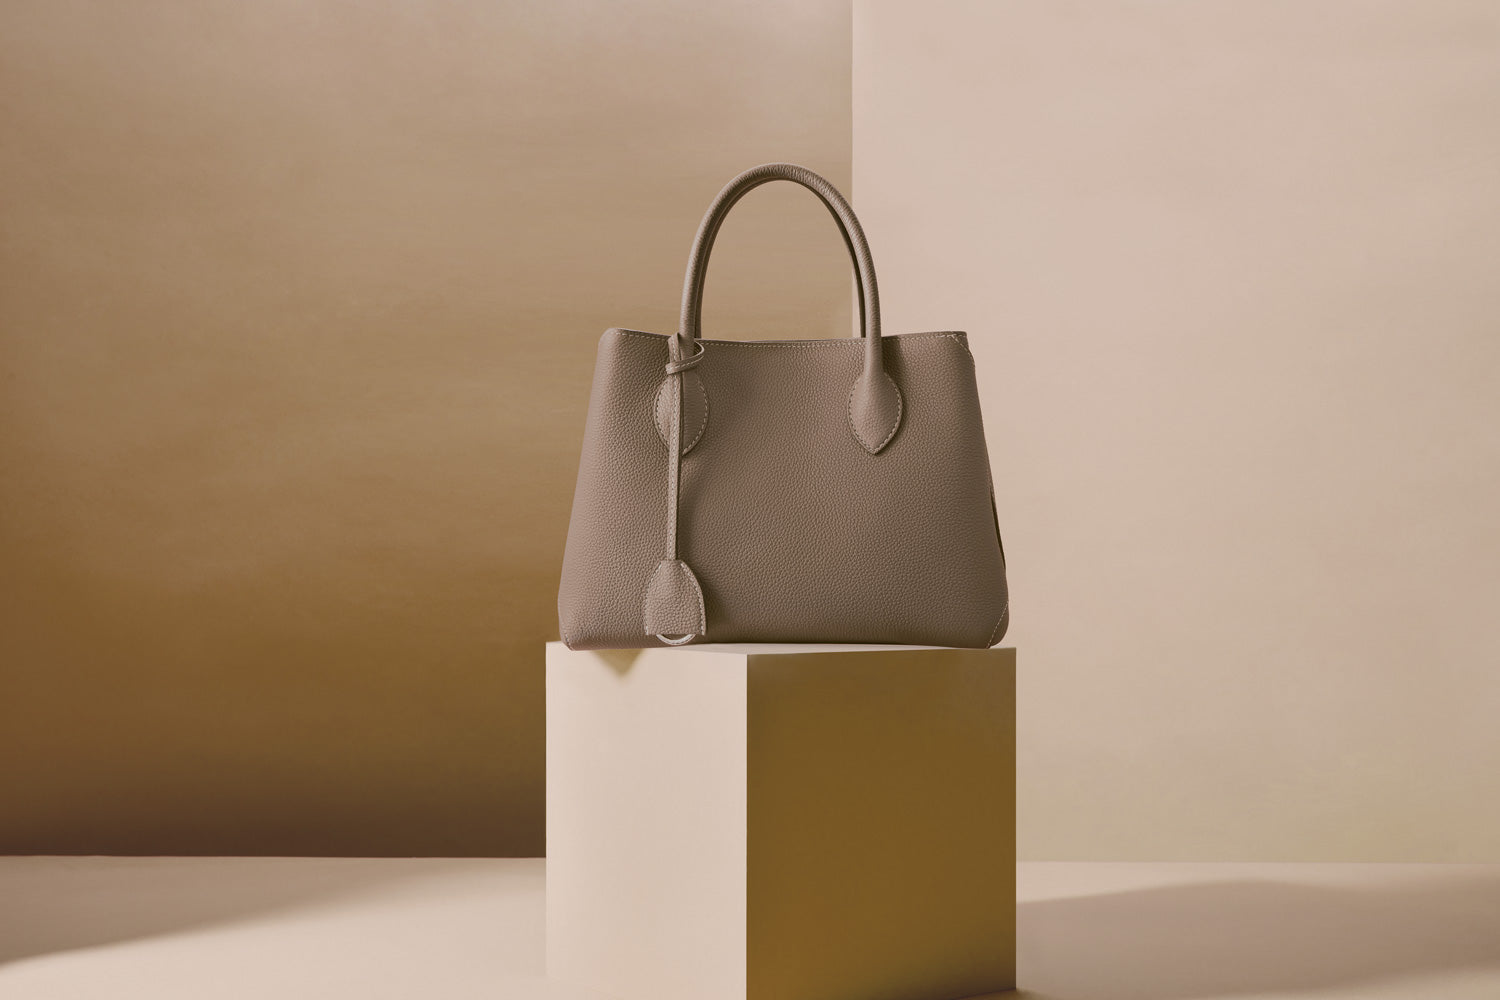 The minimalist and elegant Mia Tote Bag in the timeless color Etoupe.